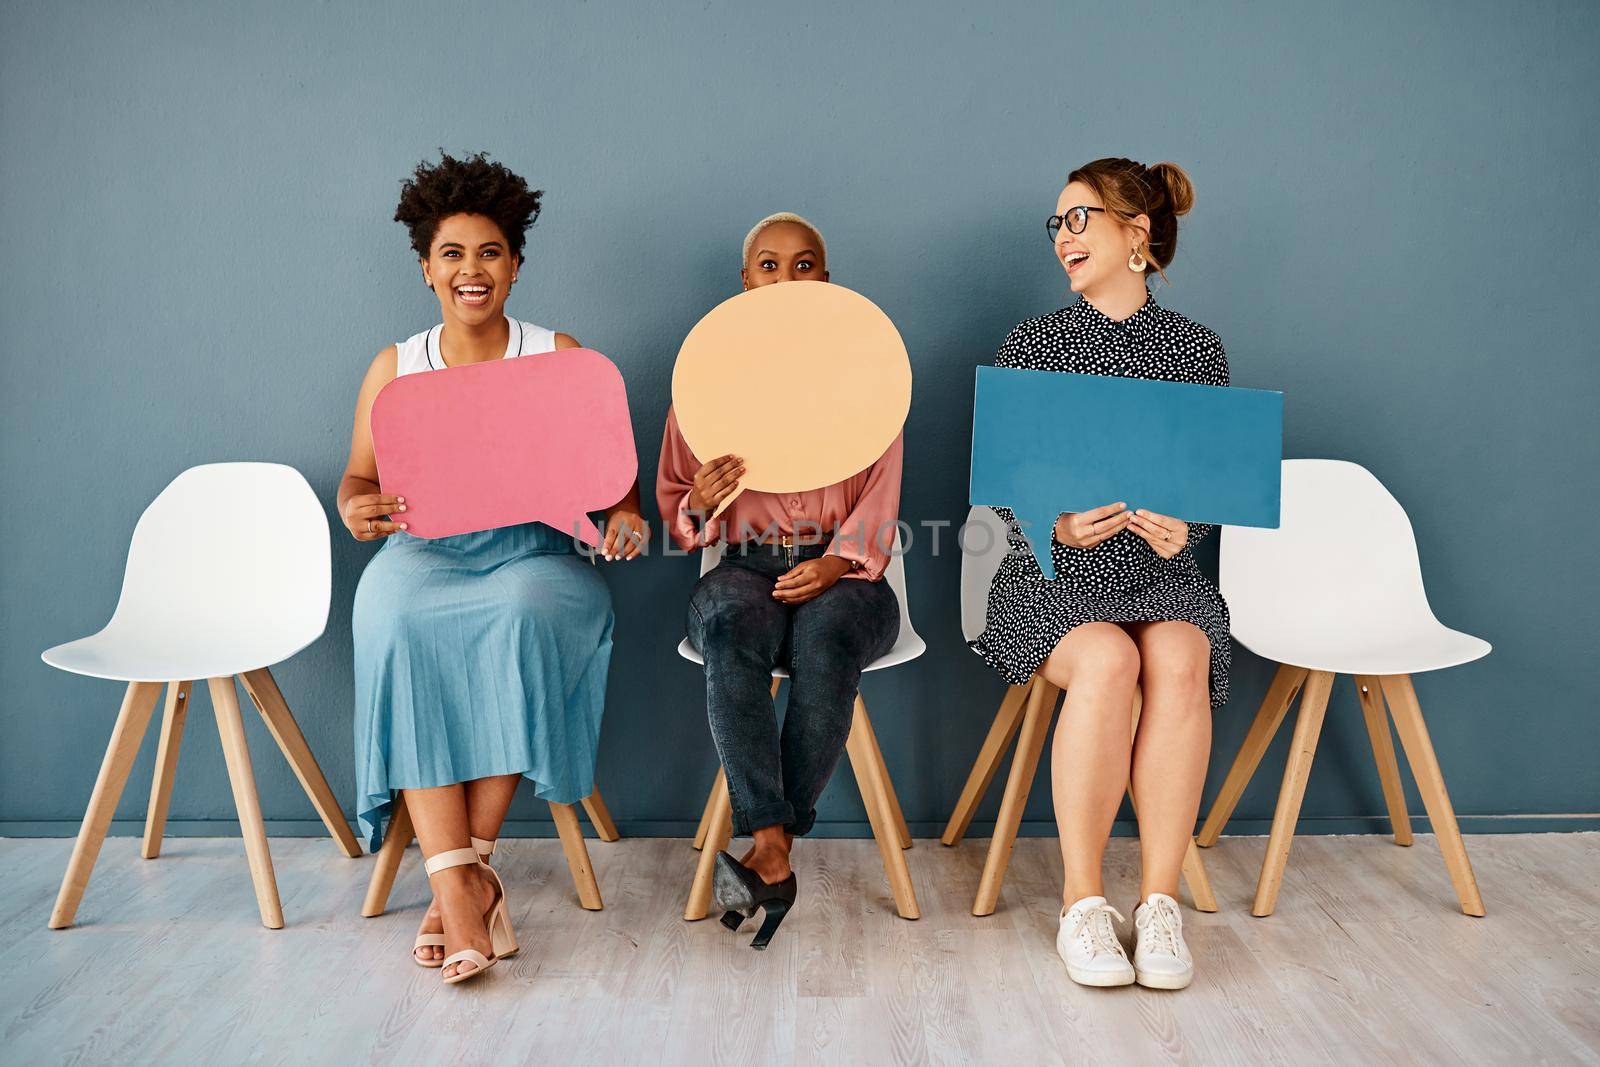 Studio shot of a group of attractive young businesswomen holding speech bubbles while sitting in a row against a grey background.